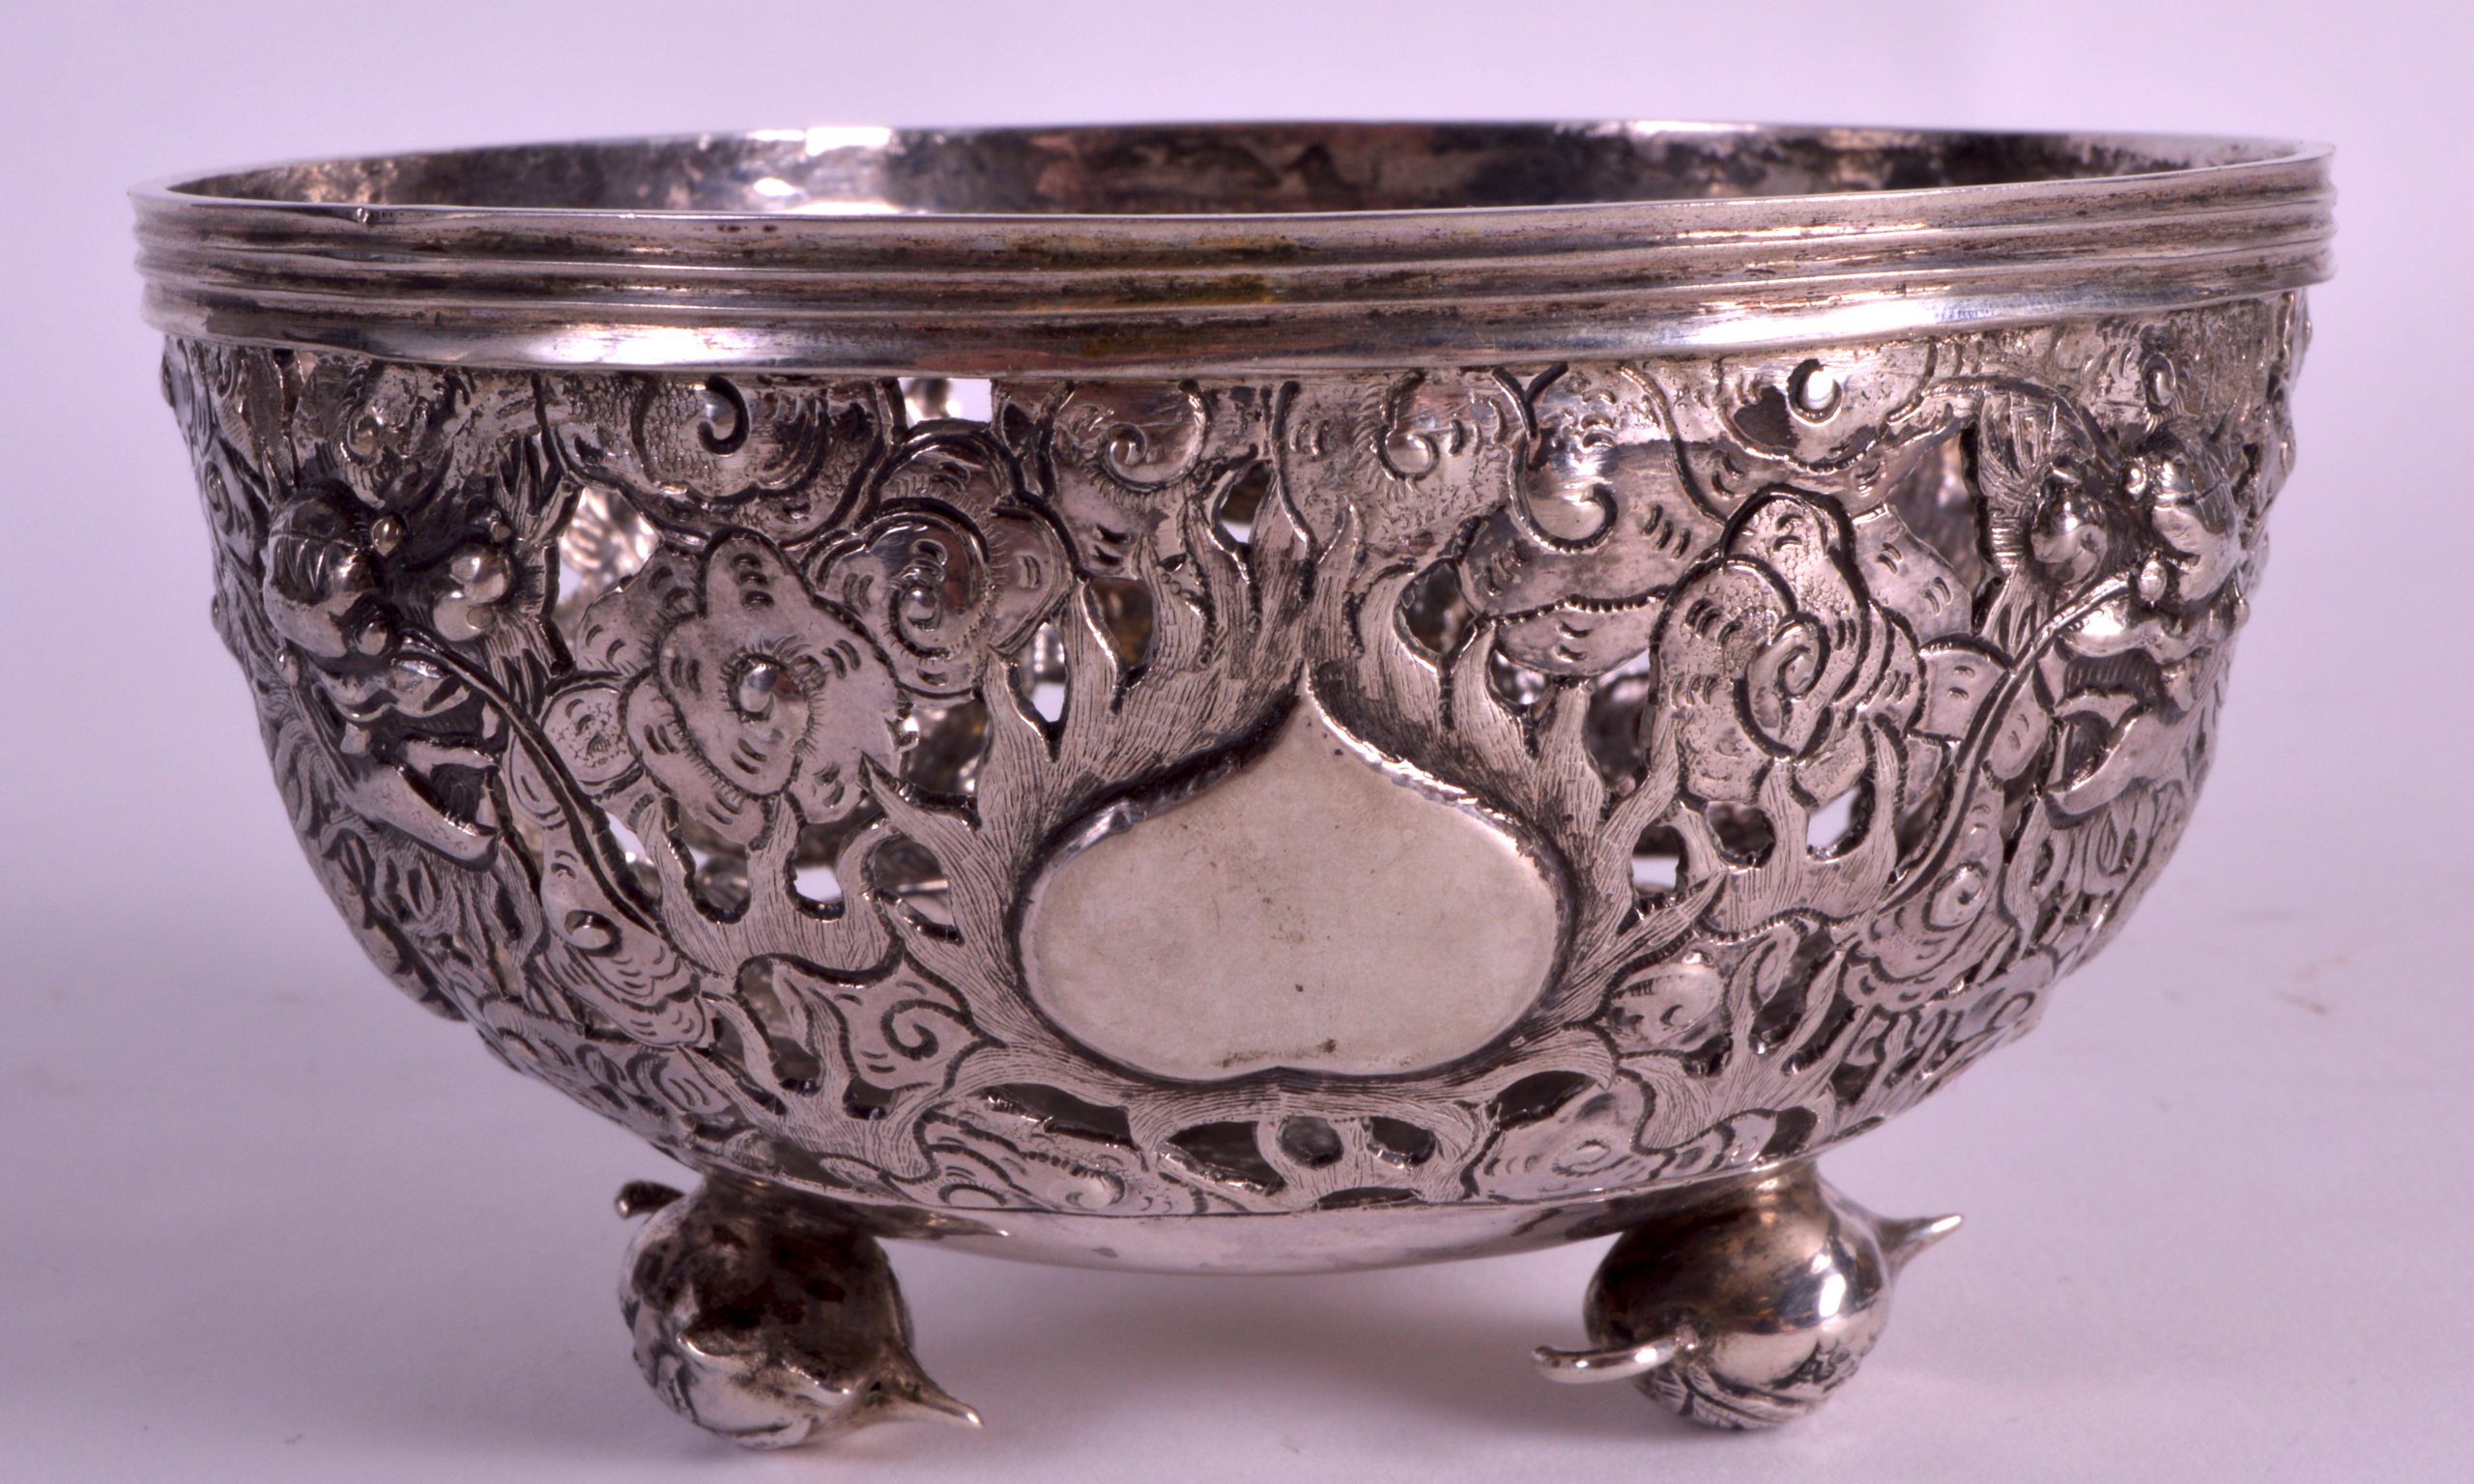 A LATE 19TH CENTURY CHINESE EXPORT SILVER BOWL decorated with dragons upon three floral feet.